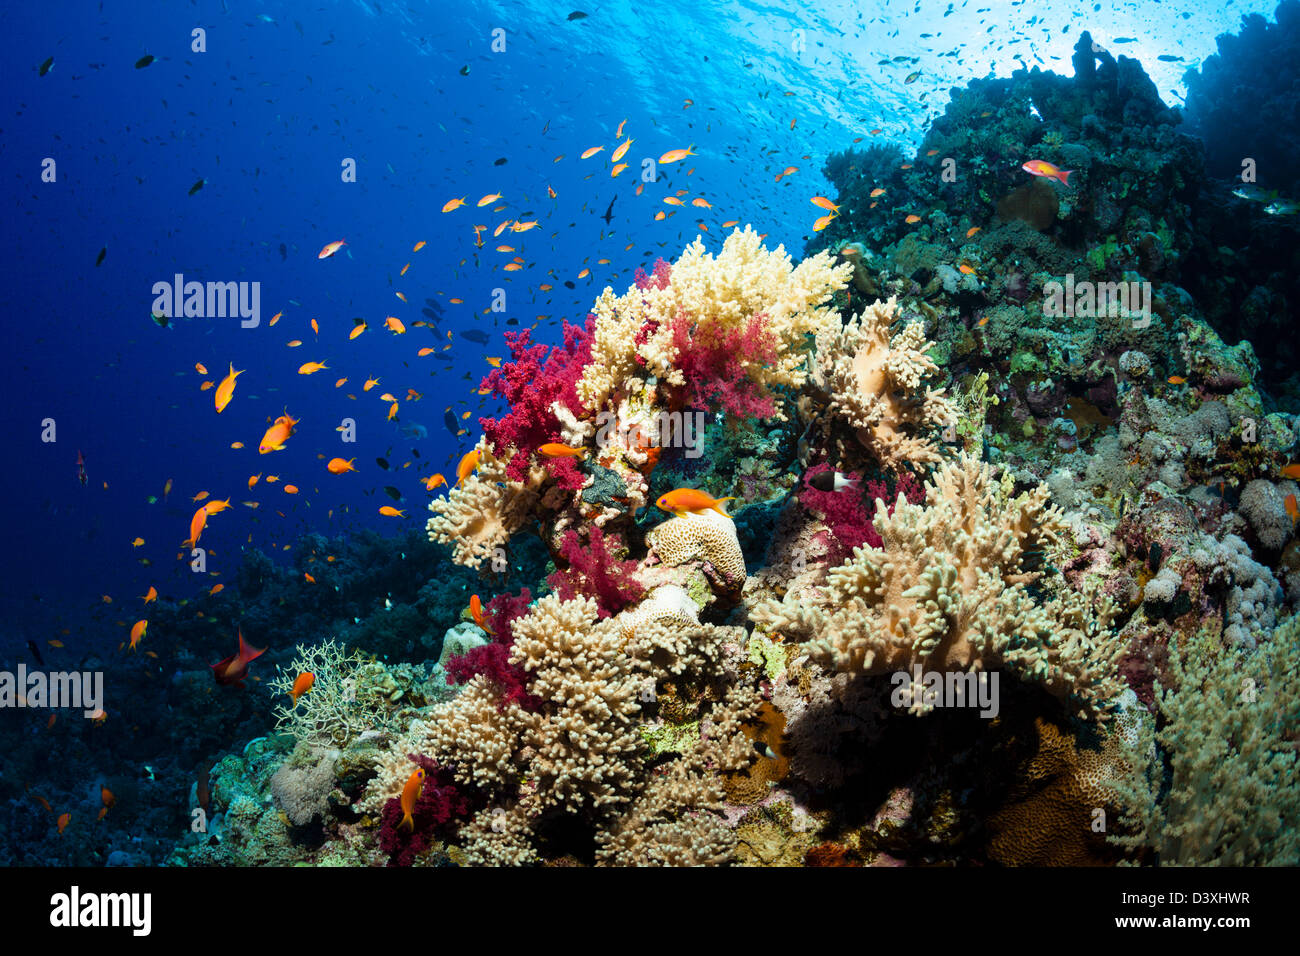 Soft Coral Reef, Dendronephthya sp., Elphinstone Reef, Mar Rosso, Egitto Foto Stock